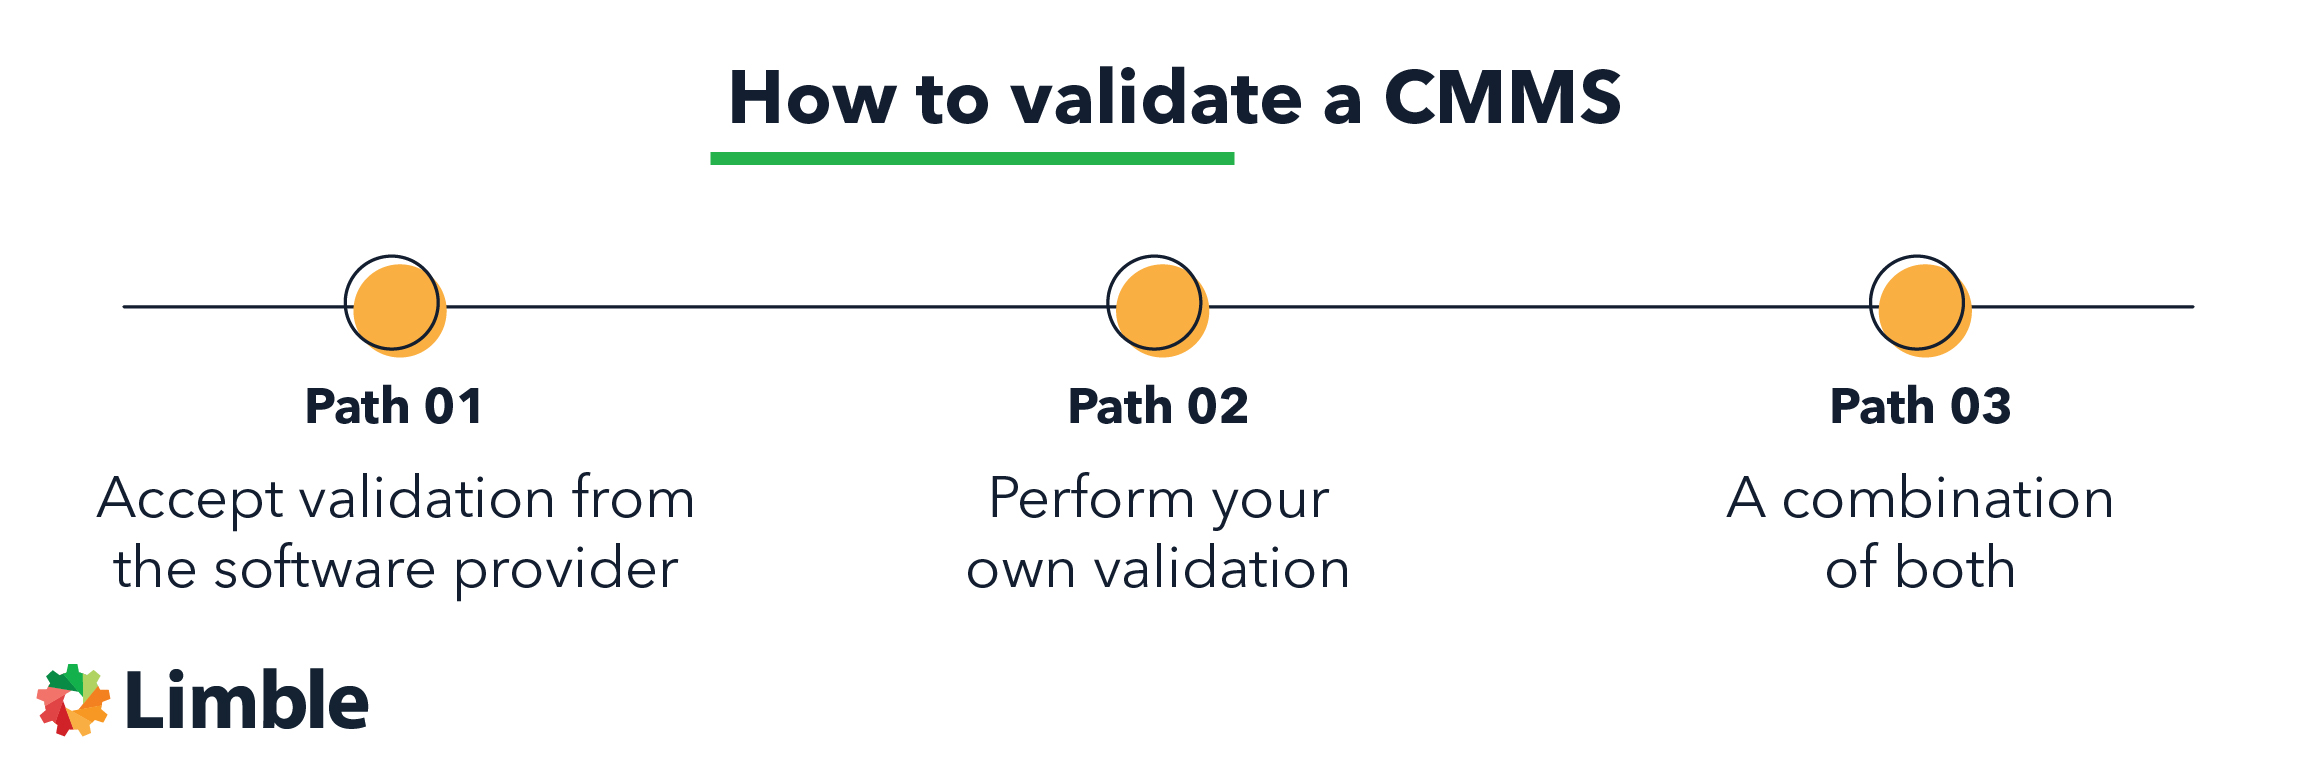 how to validate a cmms